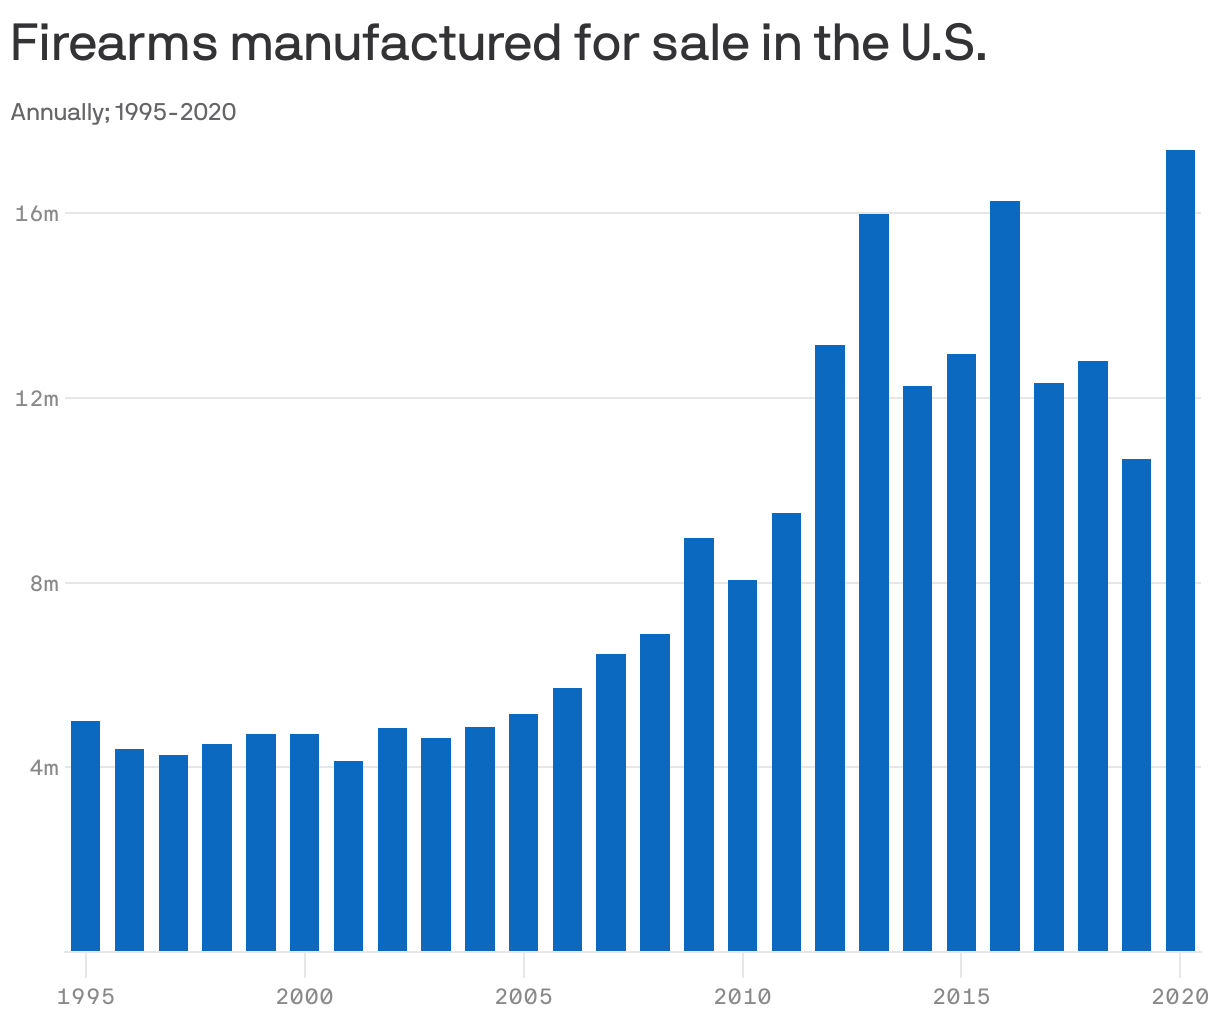 Firearms manufactured for sale in the U.S.